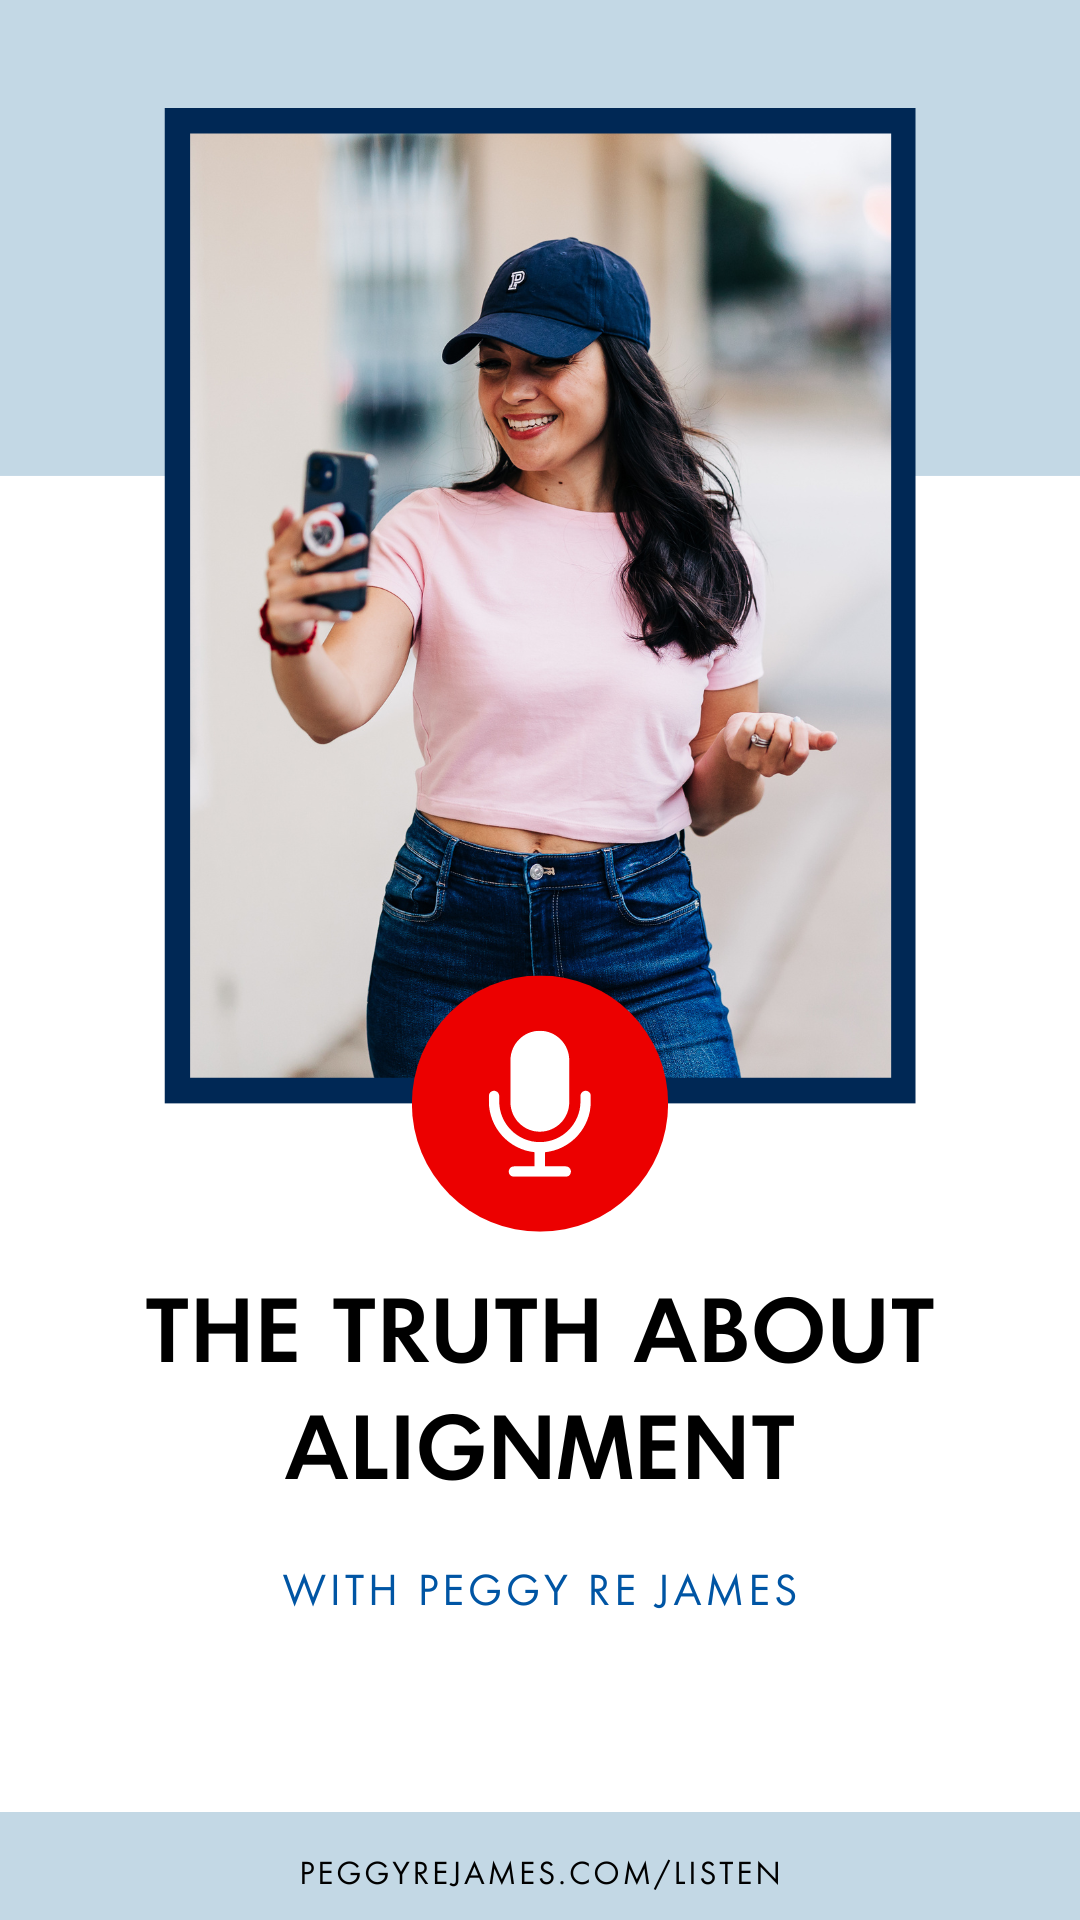 The truth about alignment